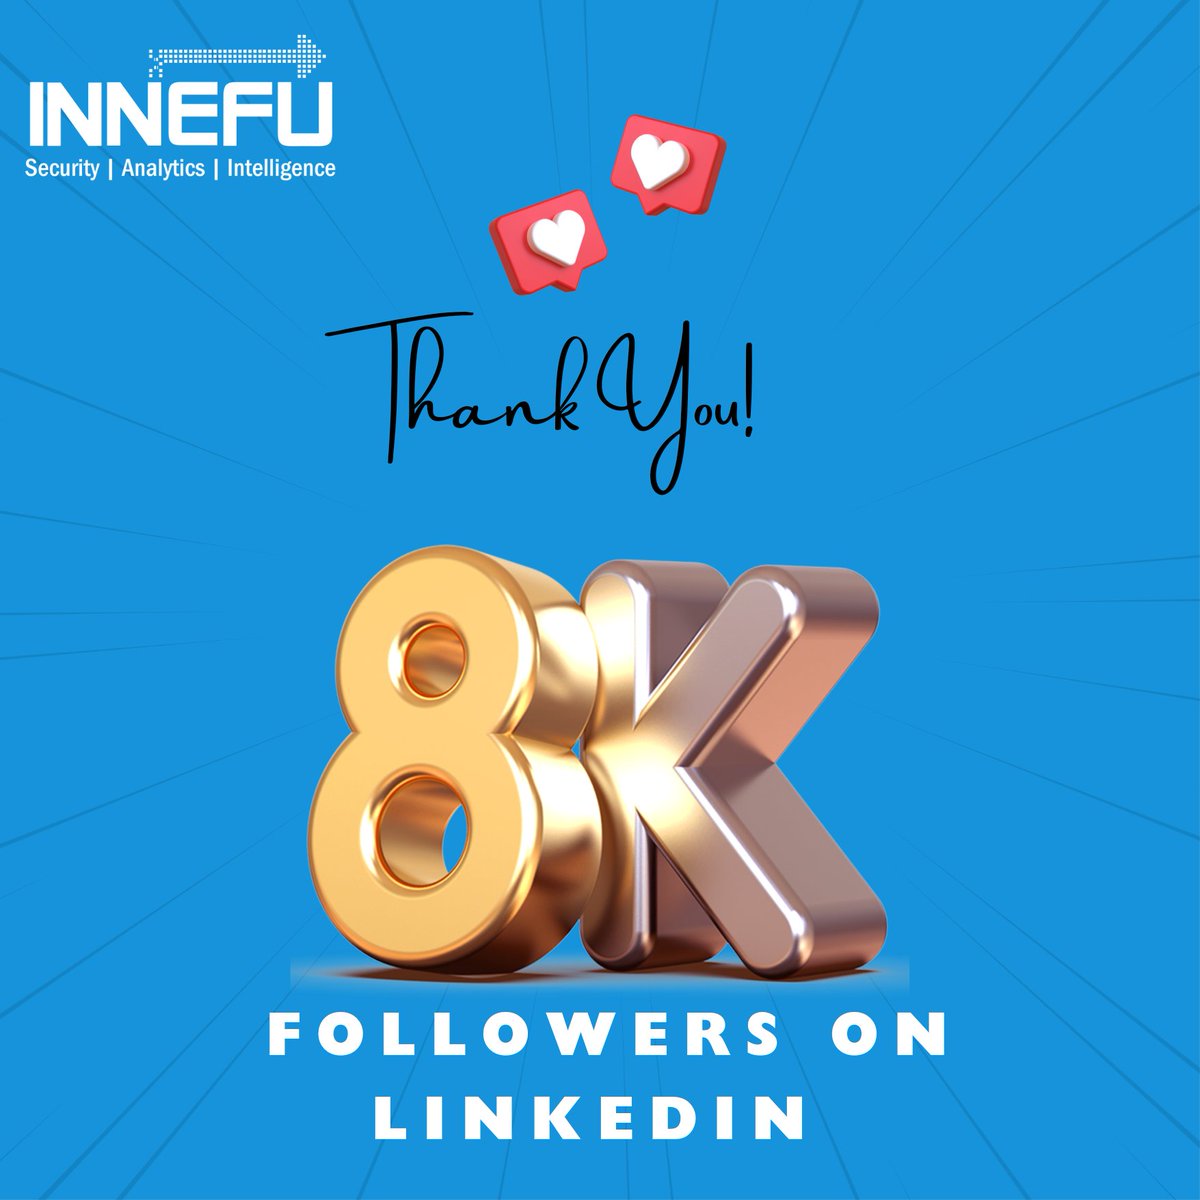 8000 Voices, 8000 Visions, 8000 Victories!!

We’ve woven a tapestry of talent, thread by vibrant thread, and today we stand 8,000 strong. This isn’t just a number, it’s a narrative of passion, perseverance, and partnership.
A heartfelt thanks to you all.
@Innefu #GrowthJourney